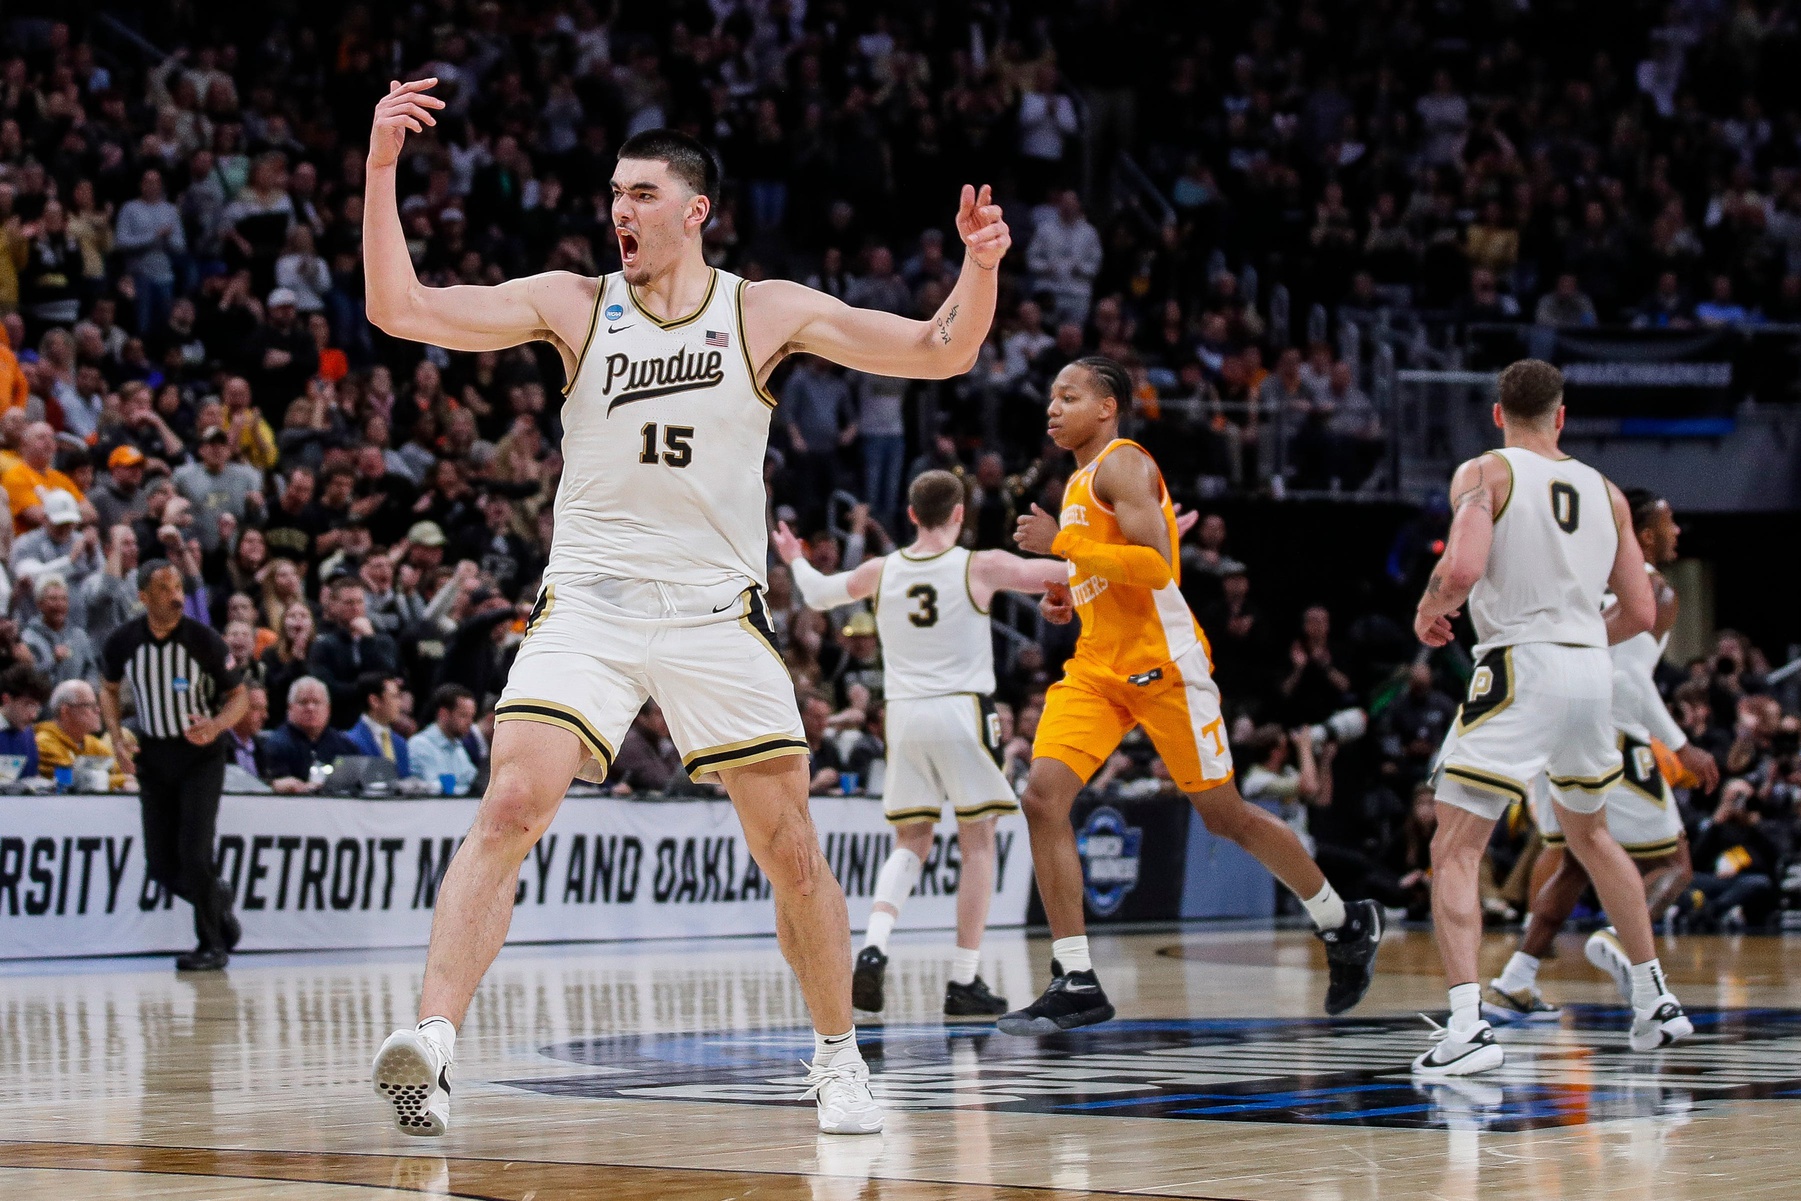 Zach Edey leads the NCAA Final Four Preview for the Purdue Boilermakers.